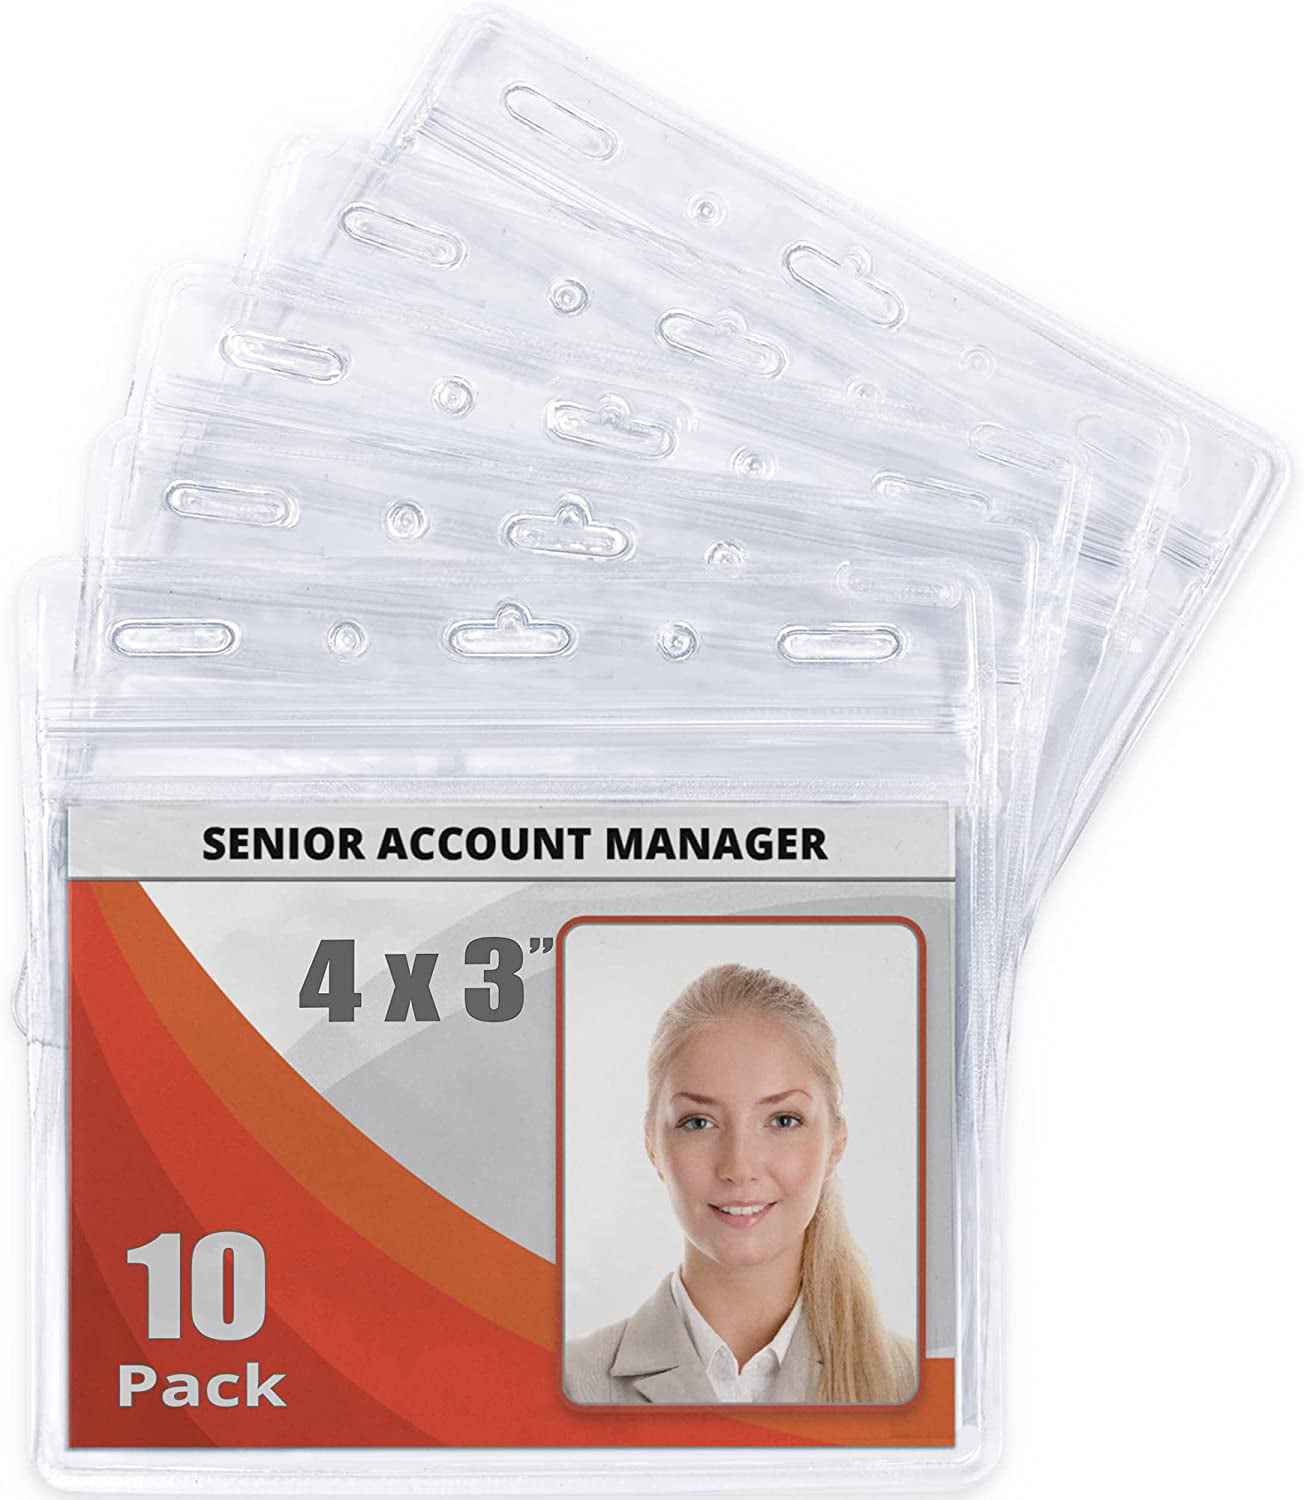 Vertical Style Clear Plastic Badge Holder 100 Pack Resealable Waterproof MIFFLIN ID Card Holder 